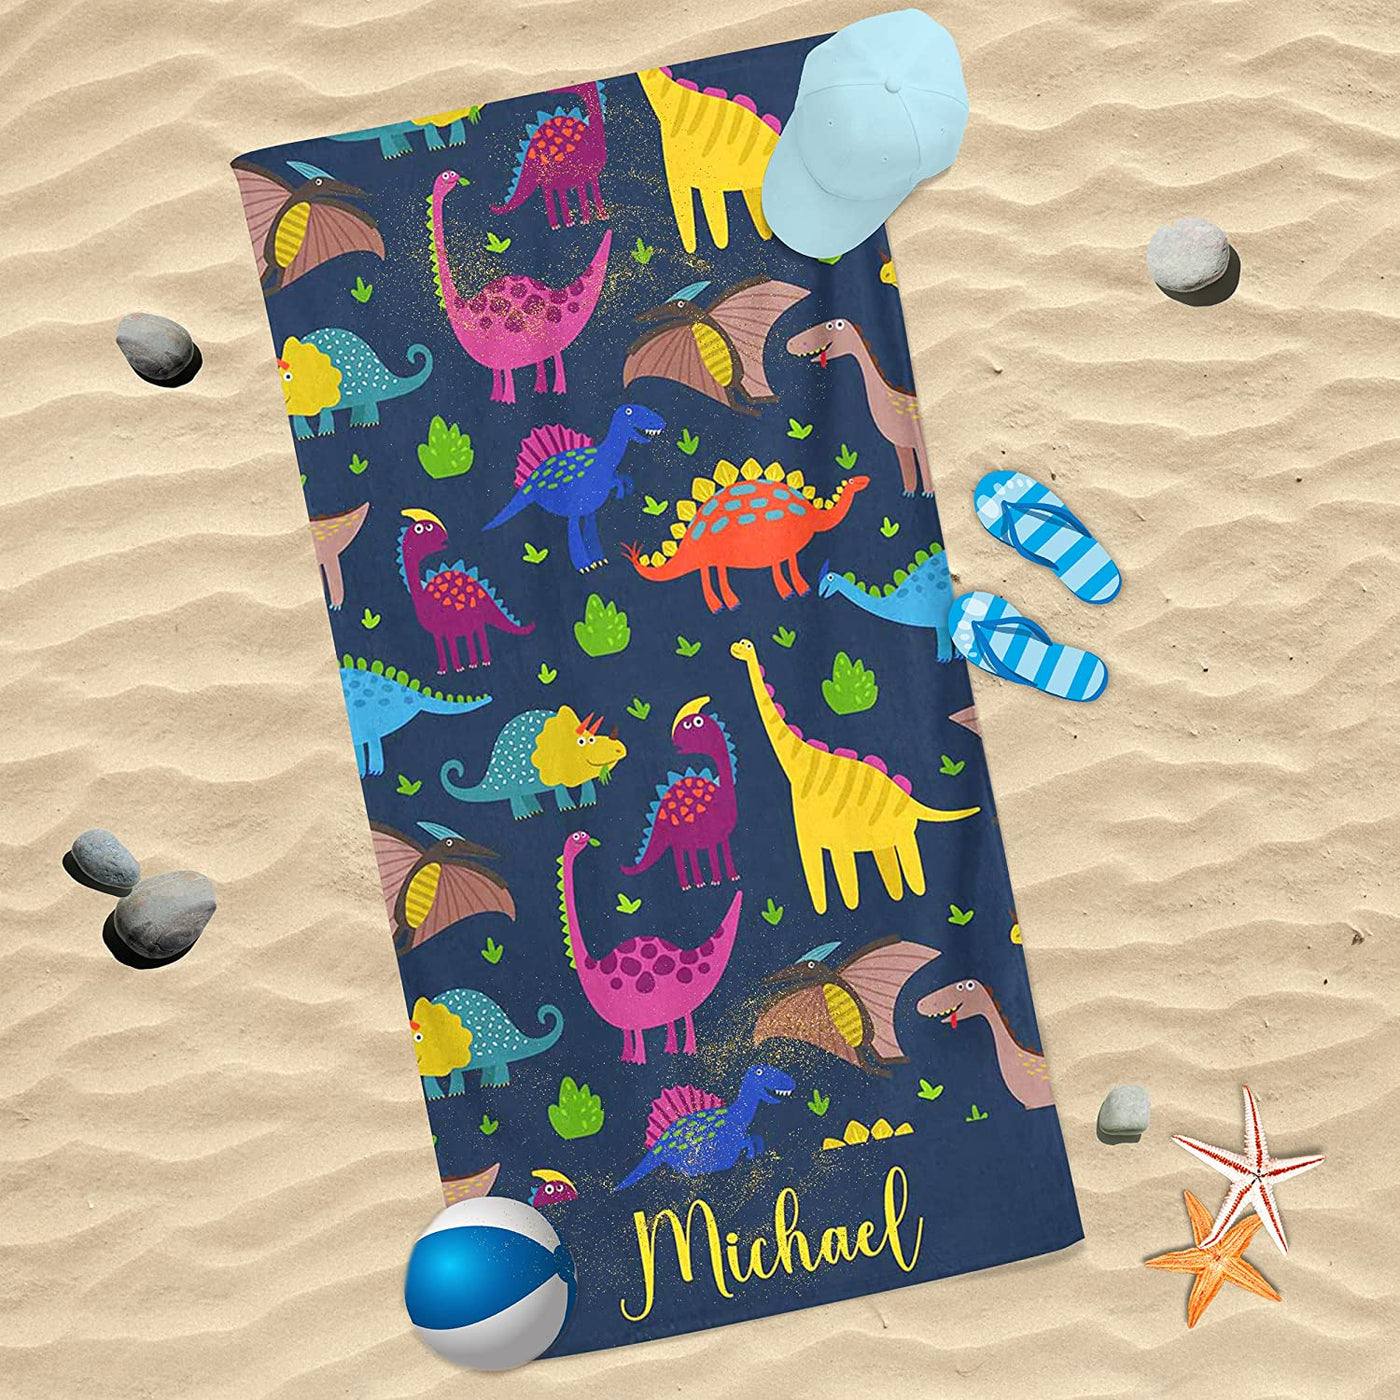 Personalized Beach Towel for Kids Boys with Name